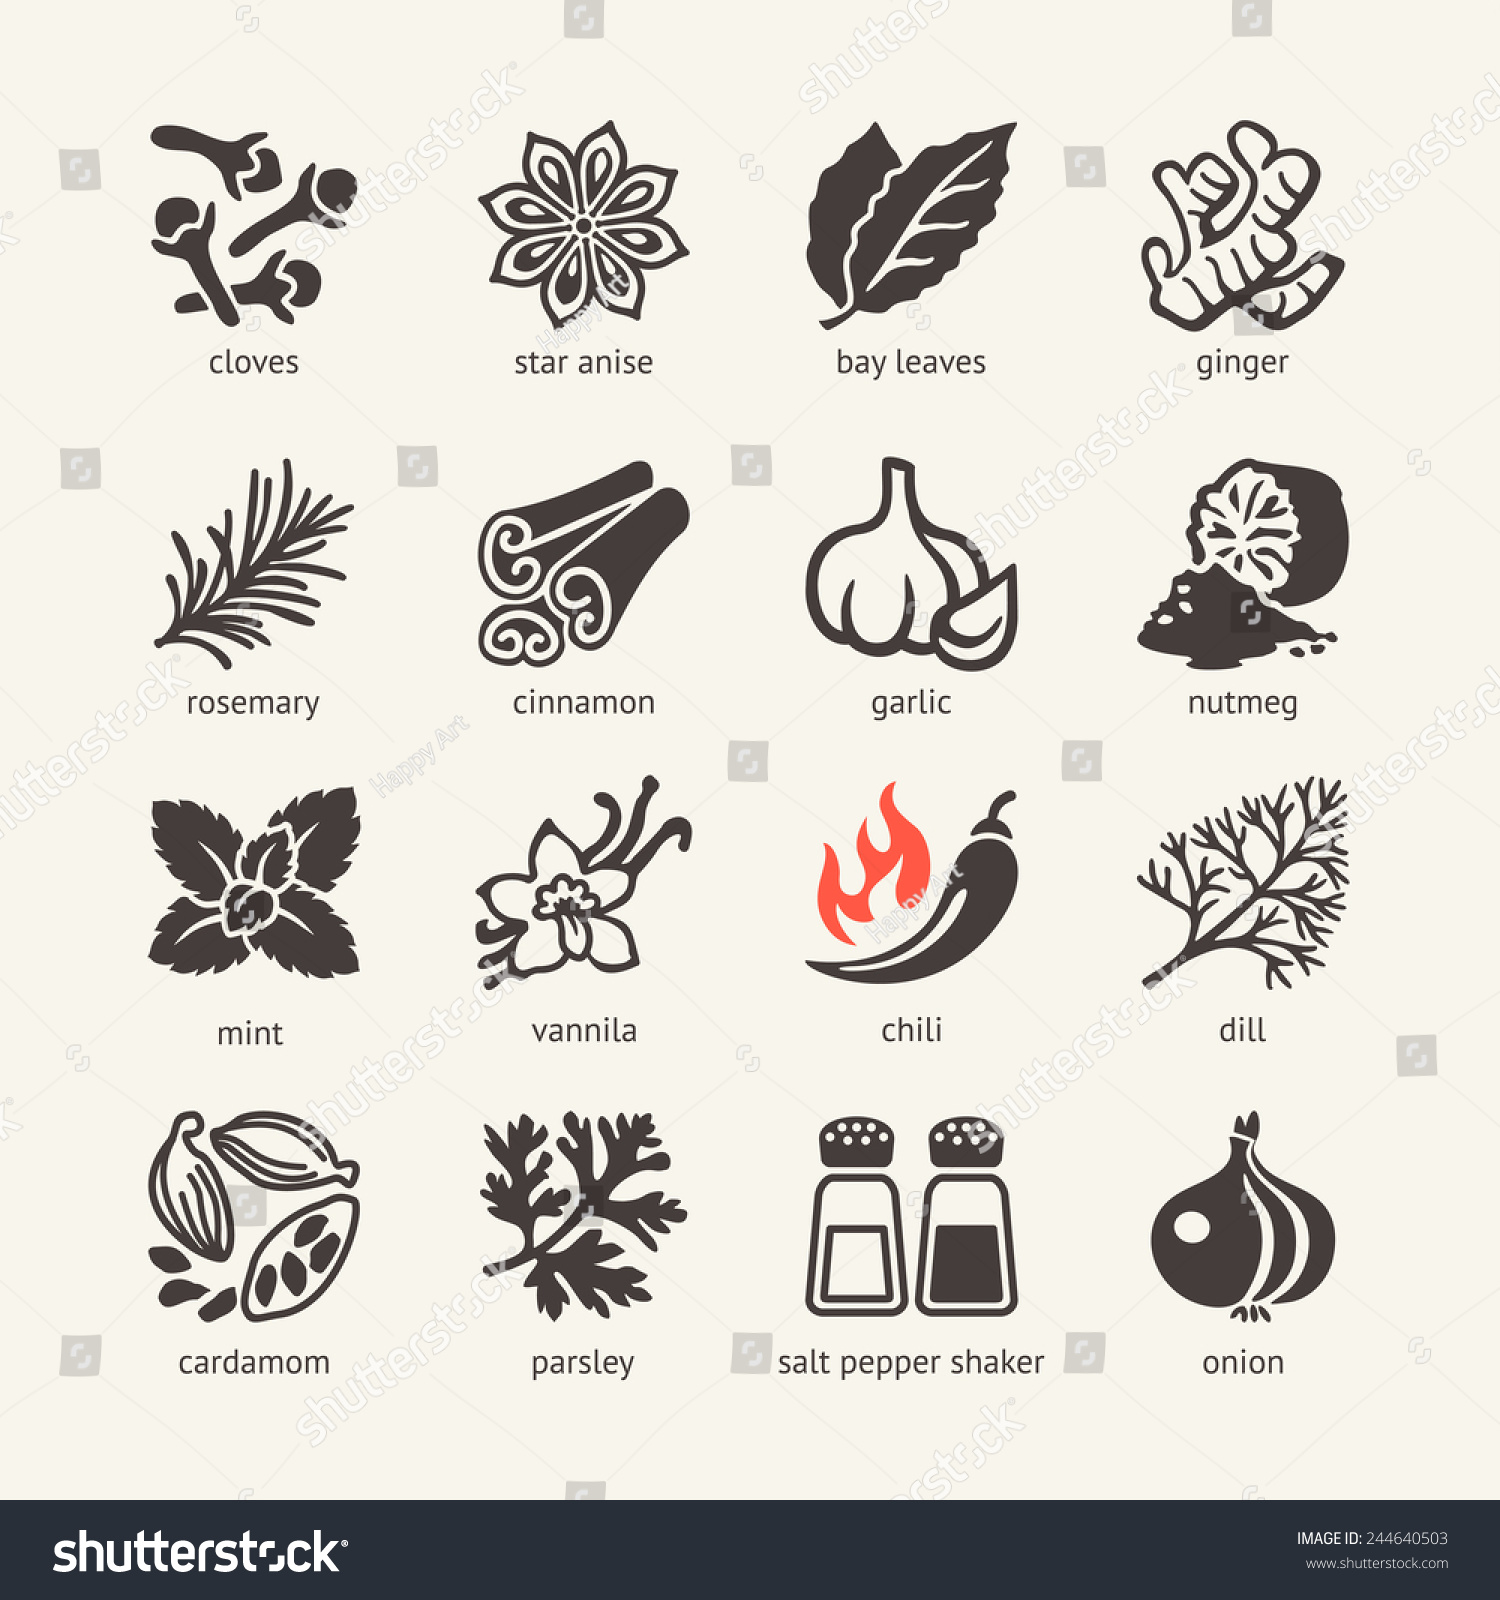 Web icon set - spices, condiments and herbs #244640503